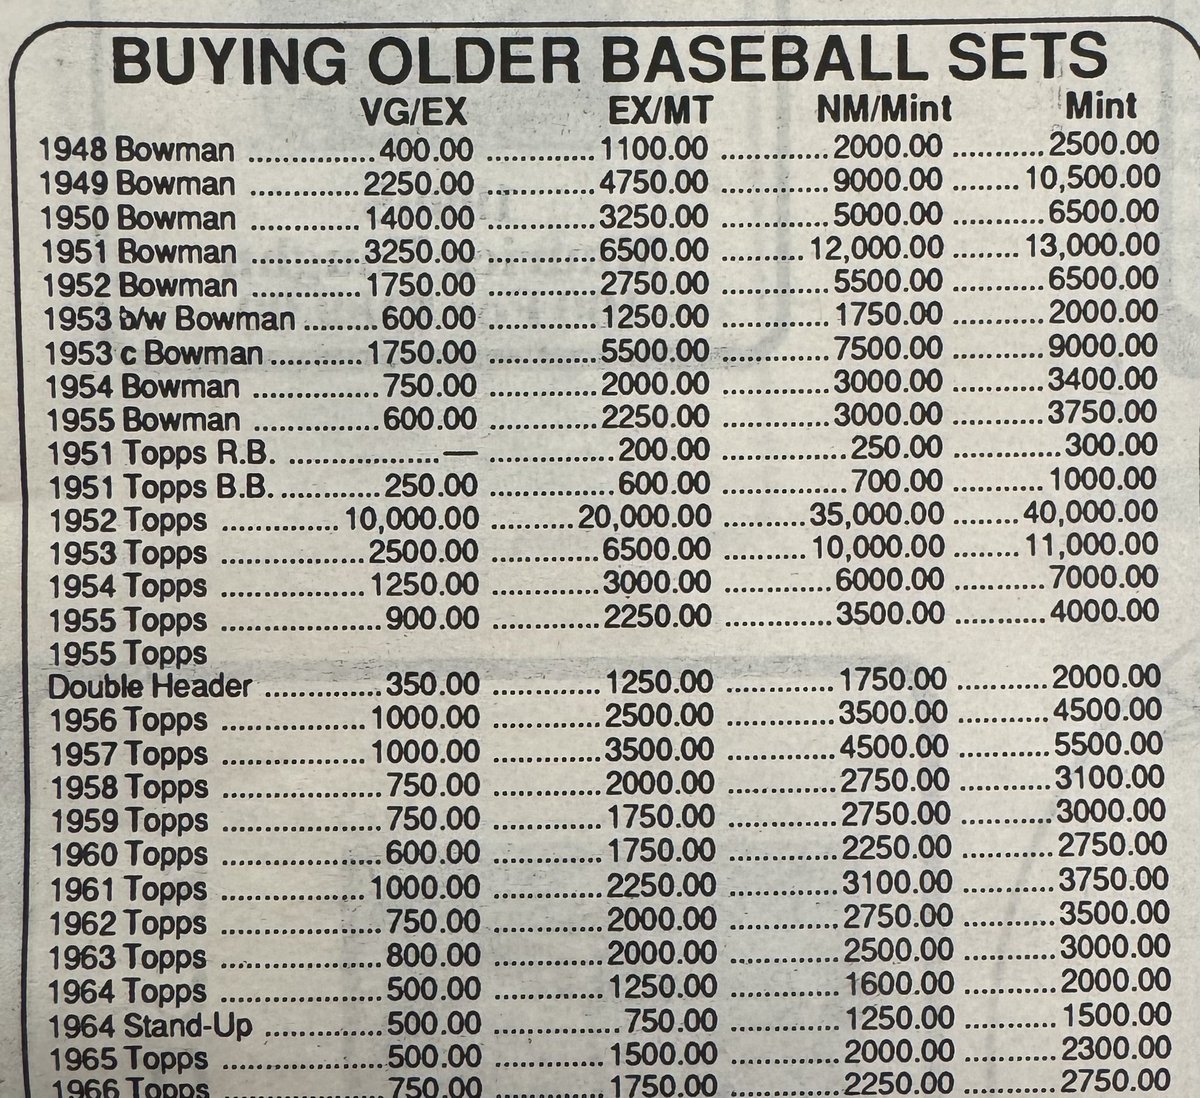 Ad in Sports Collectors Digest from this day in 1992. Howard’s Sports Collectibles is offering $40,000 for your 1952 Topps set in mint condition. Today, the Mickey Mantle alone is worth $12 million